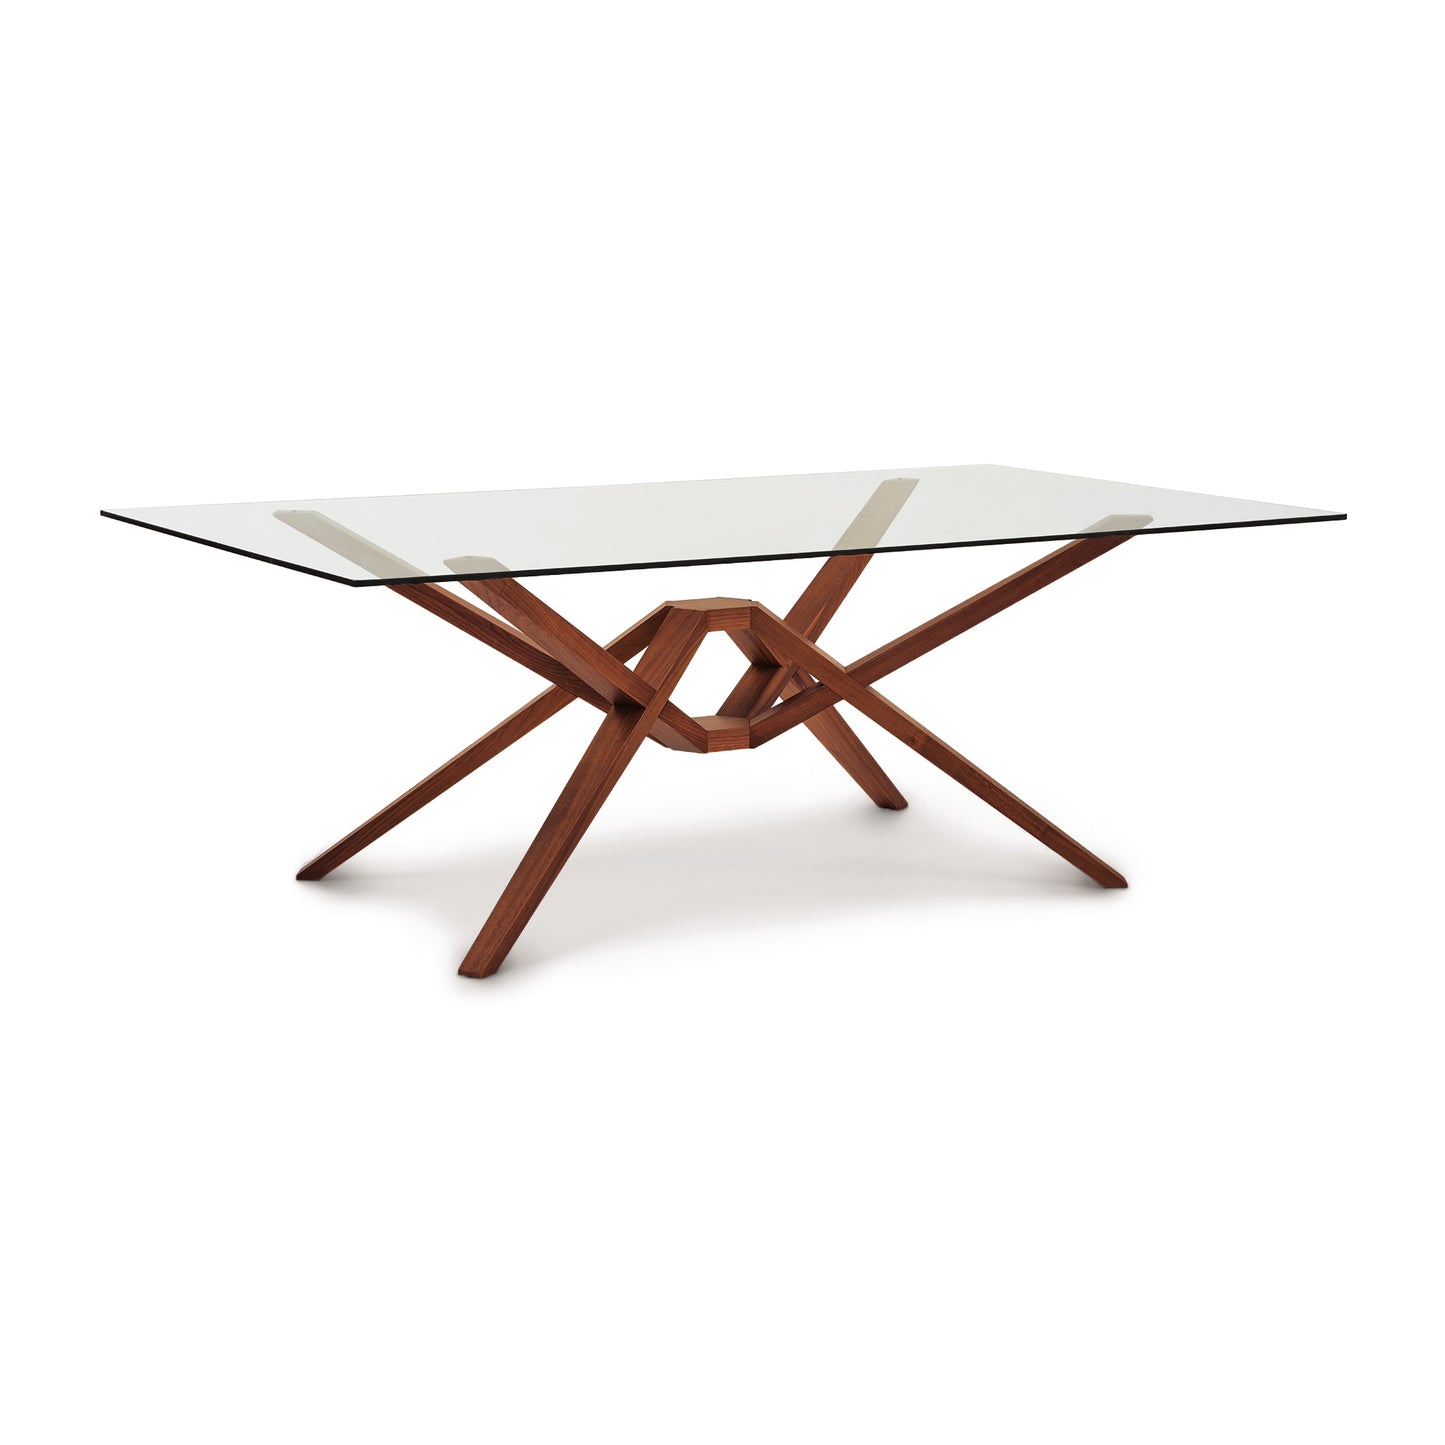 An Exeter Rectangular Glass Top Table with a solid wood base, showcasing a crisscross design by Vermont craftsmen from Copeland Furniture.